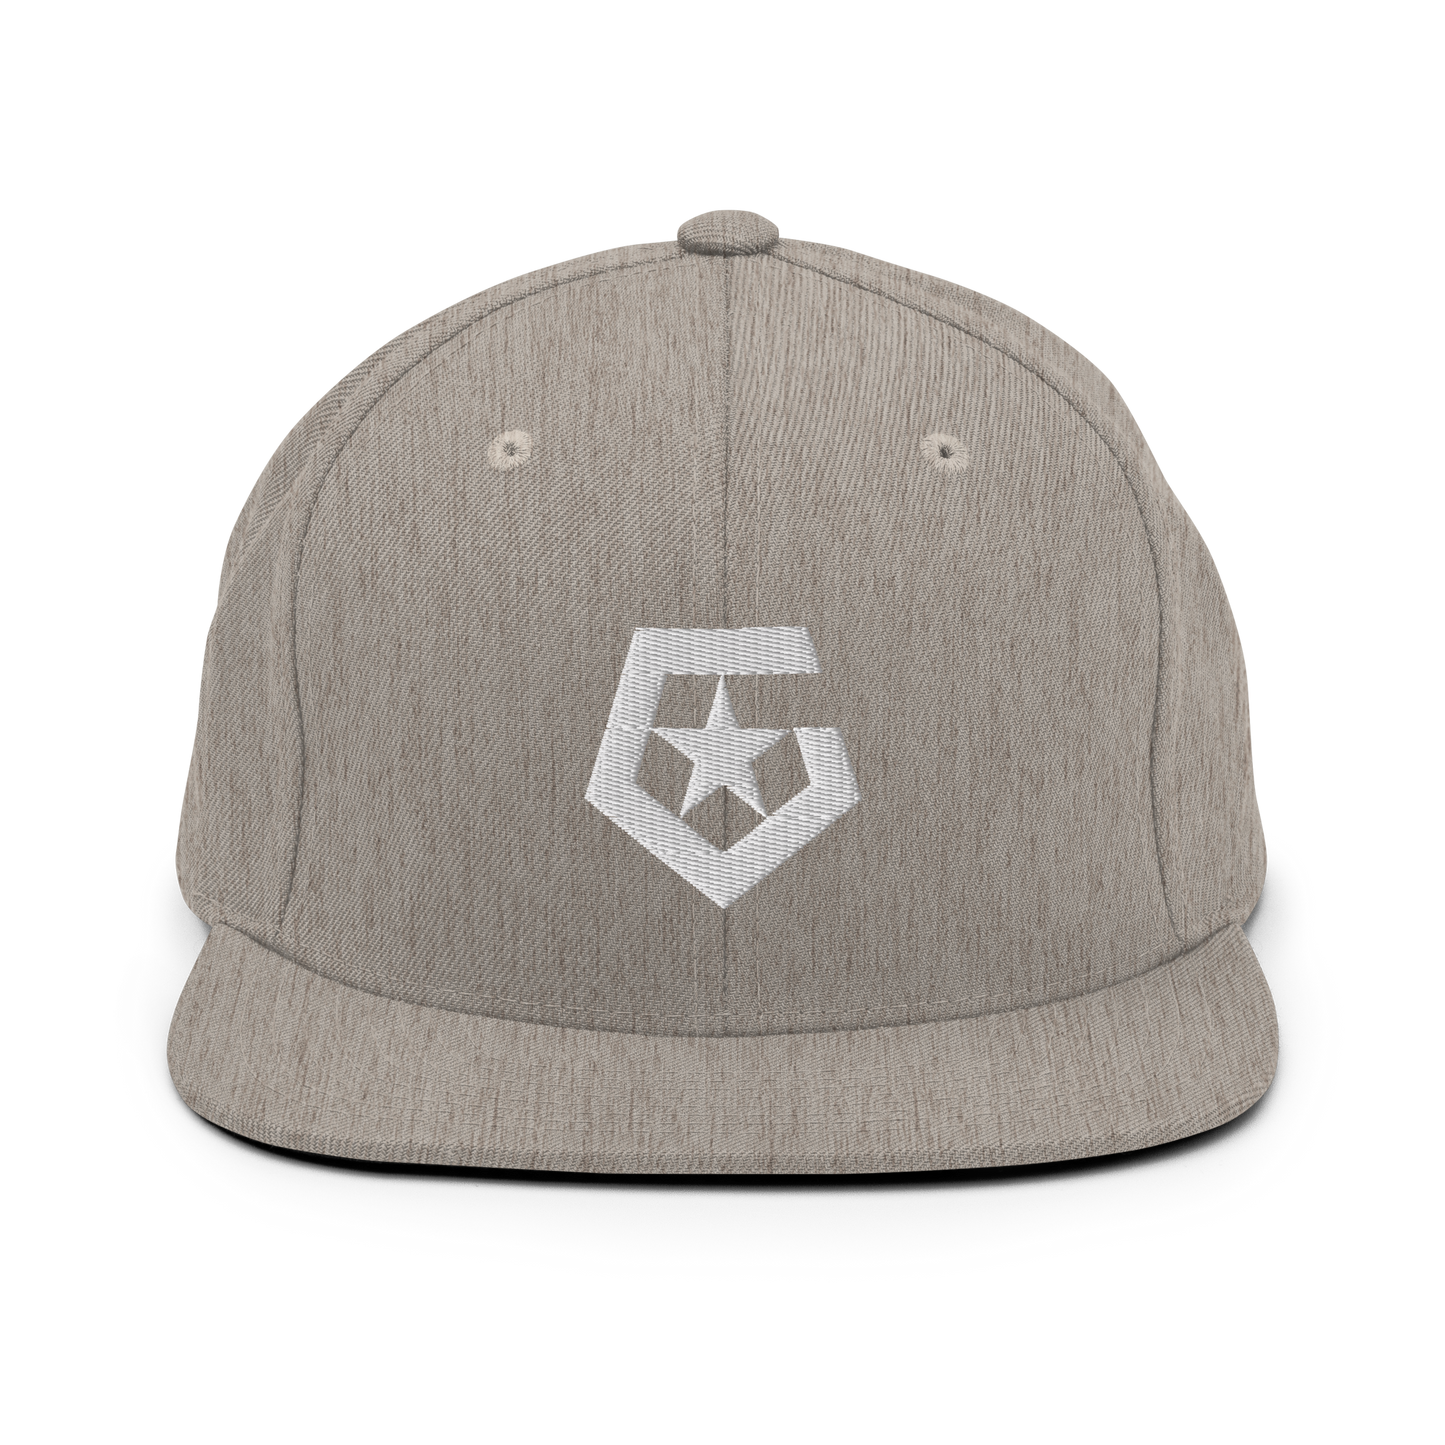 GENERAL STAR SNAPBACK - The General Booty Official Shop by More Than Just A Name | MTJN